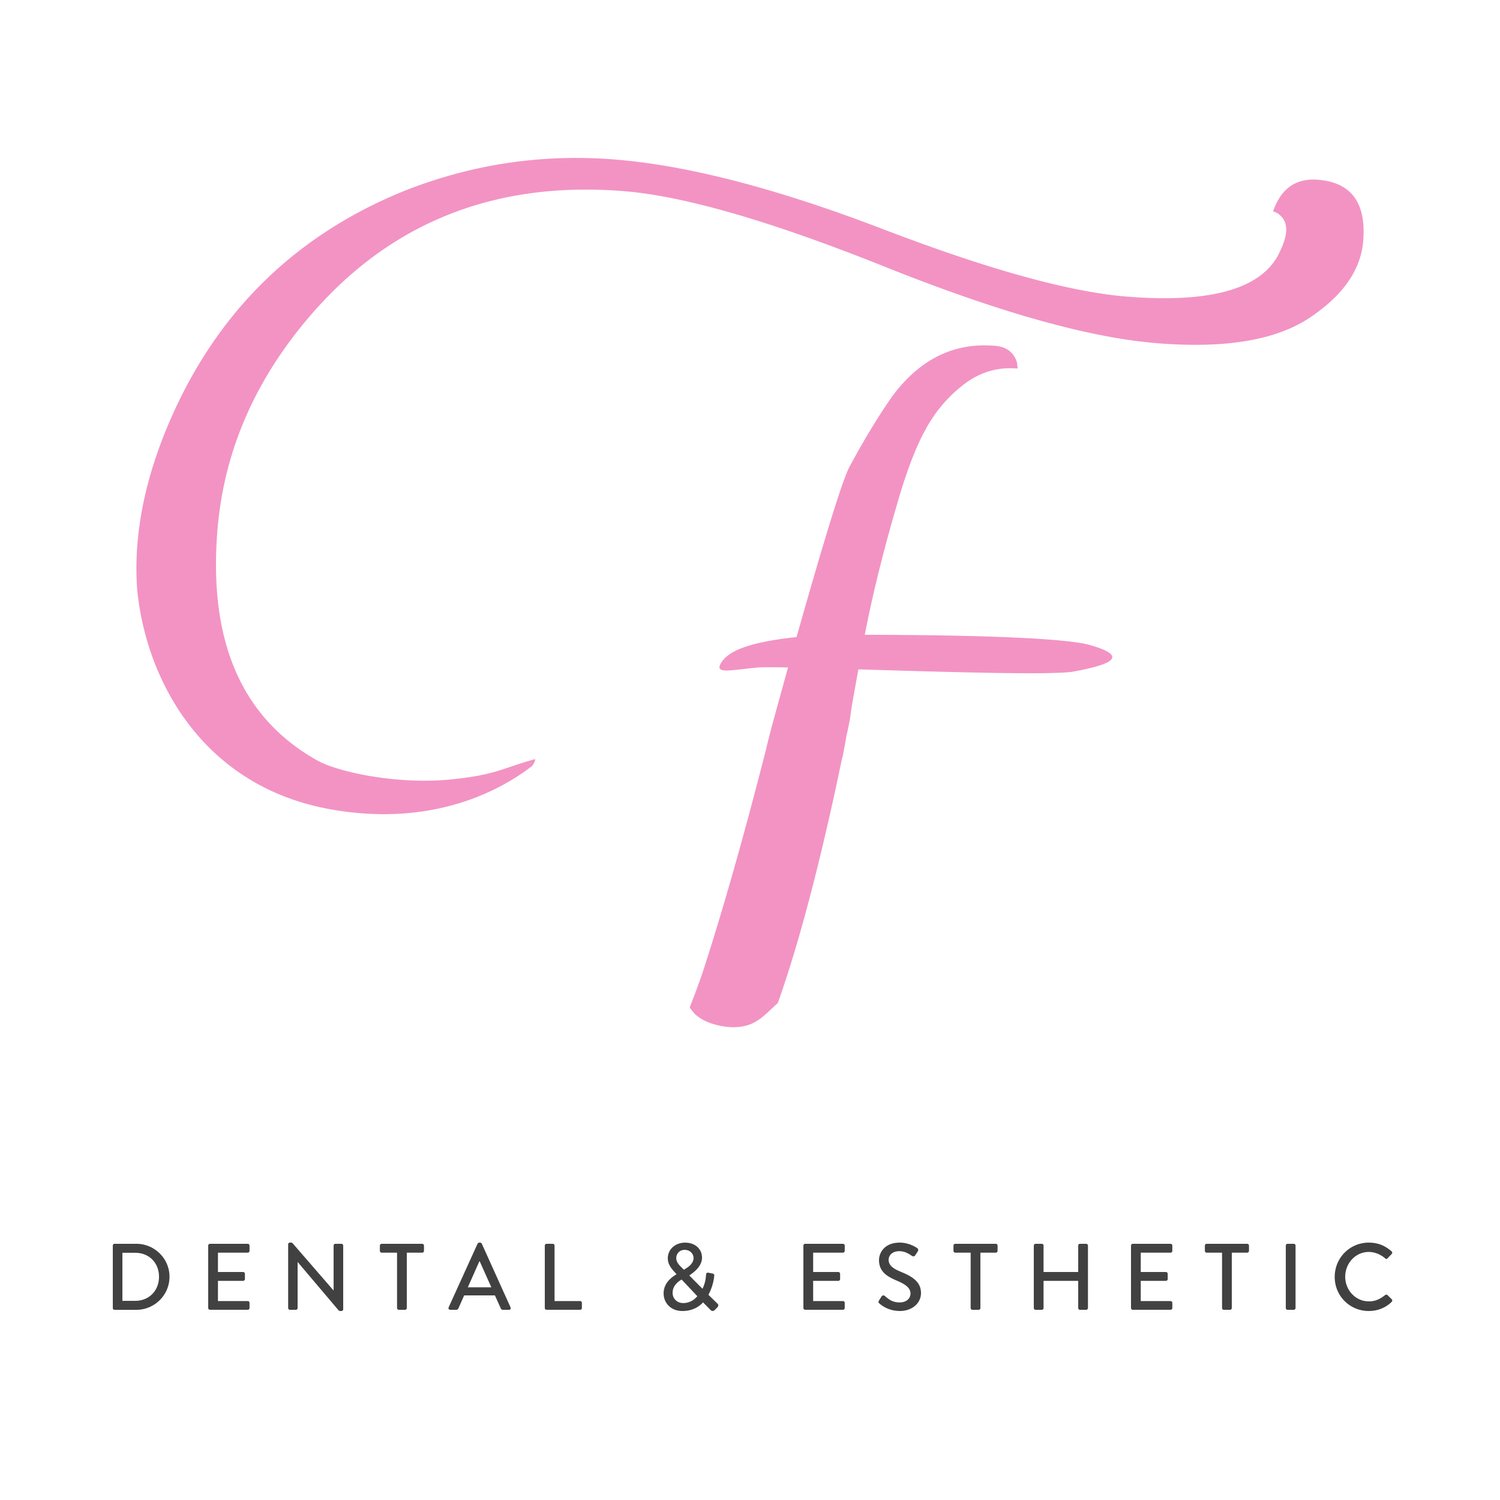 F dental and esthetic